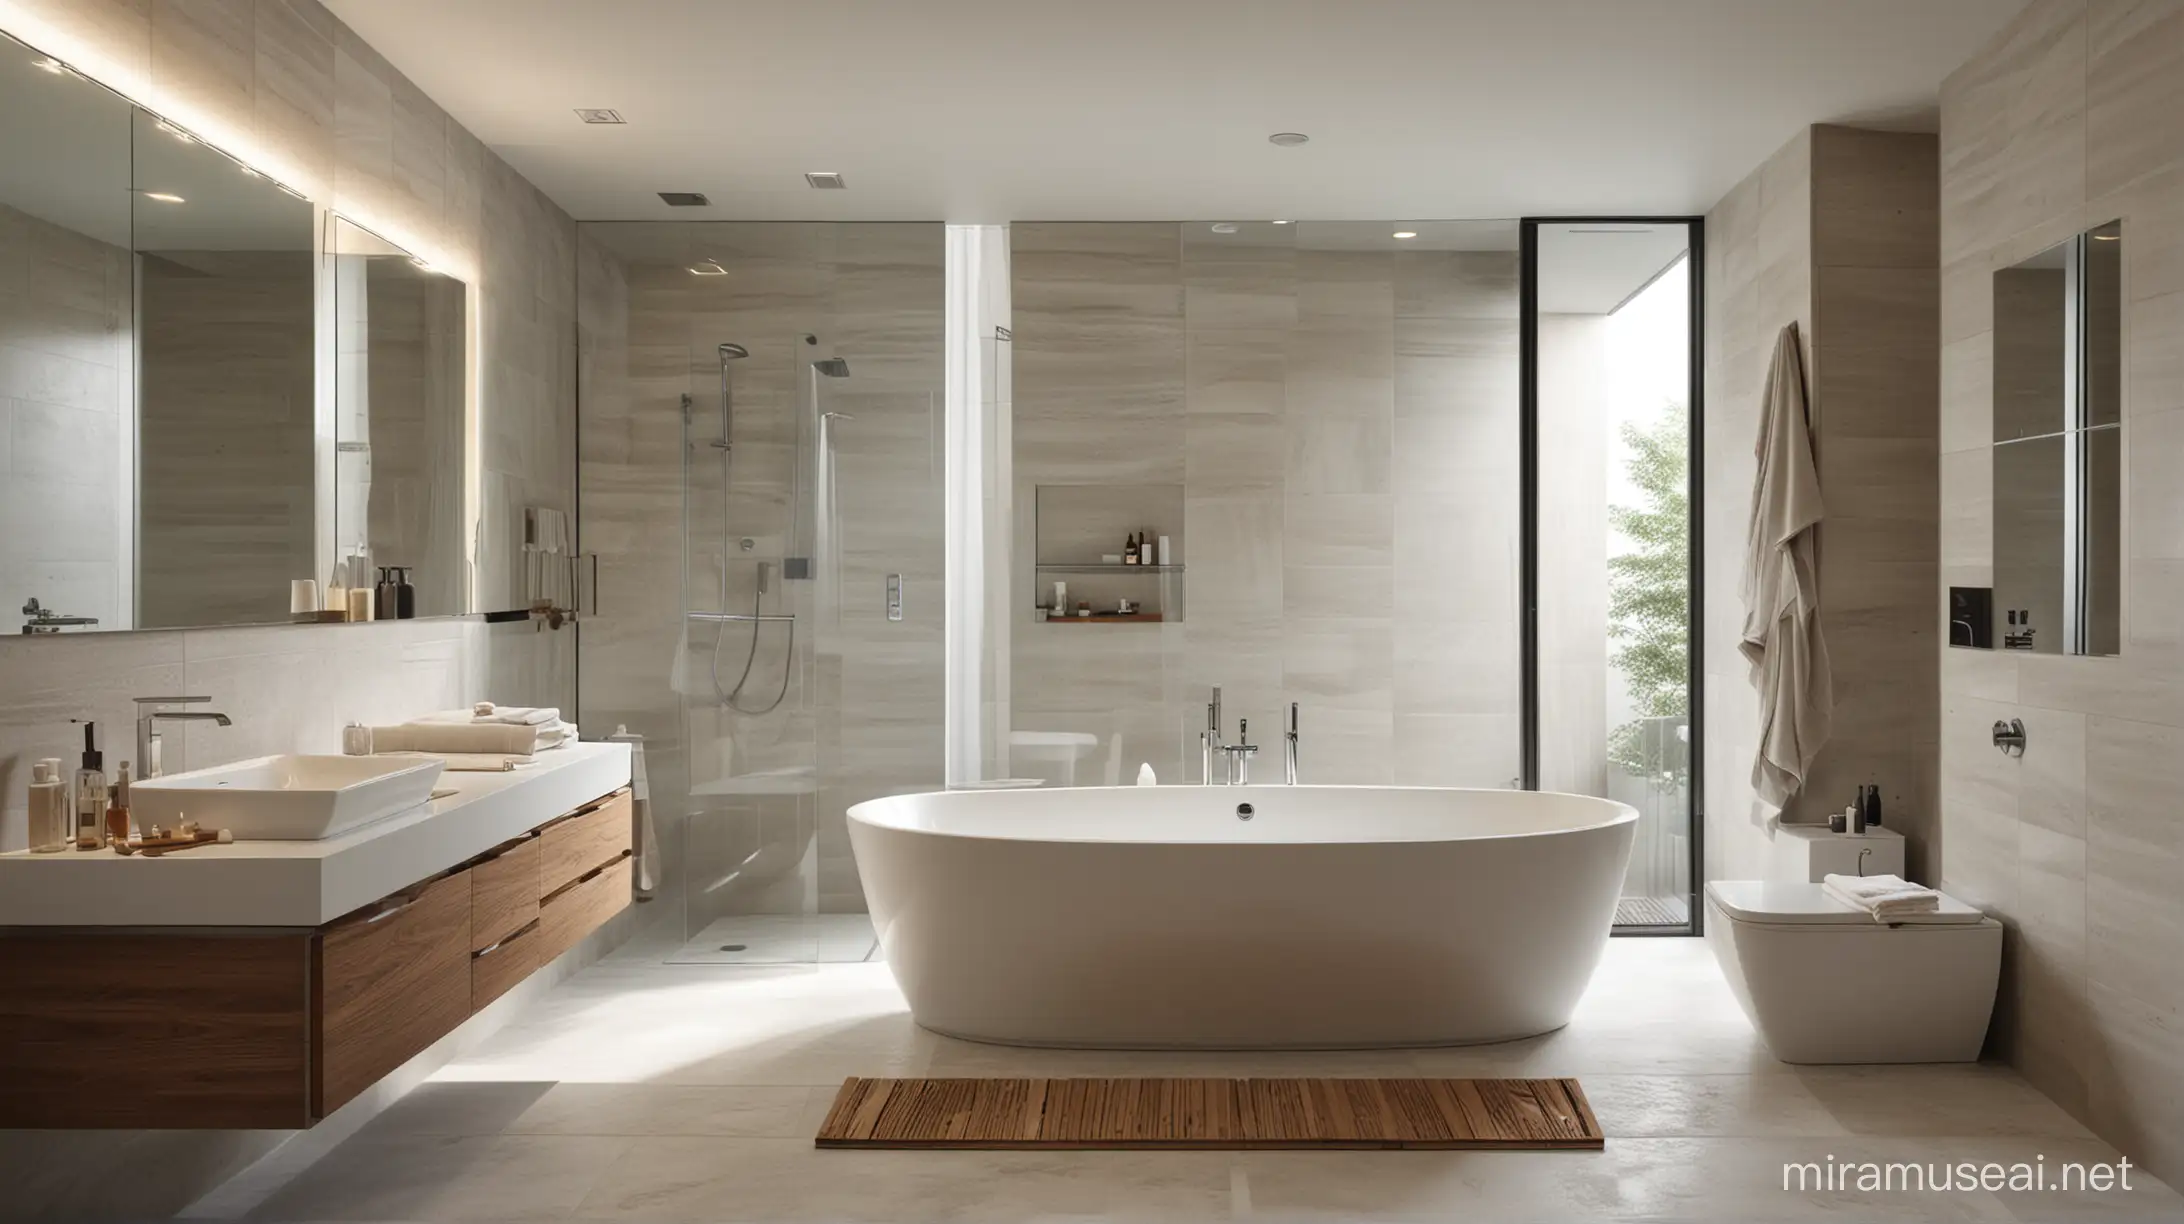 Contemporary Bathroom Interior with Minimalist Design and Natural Lighting